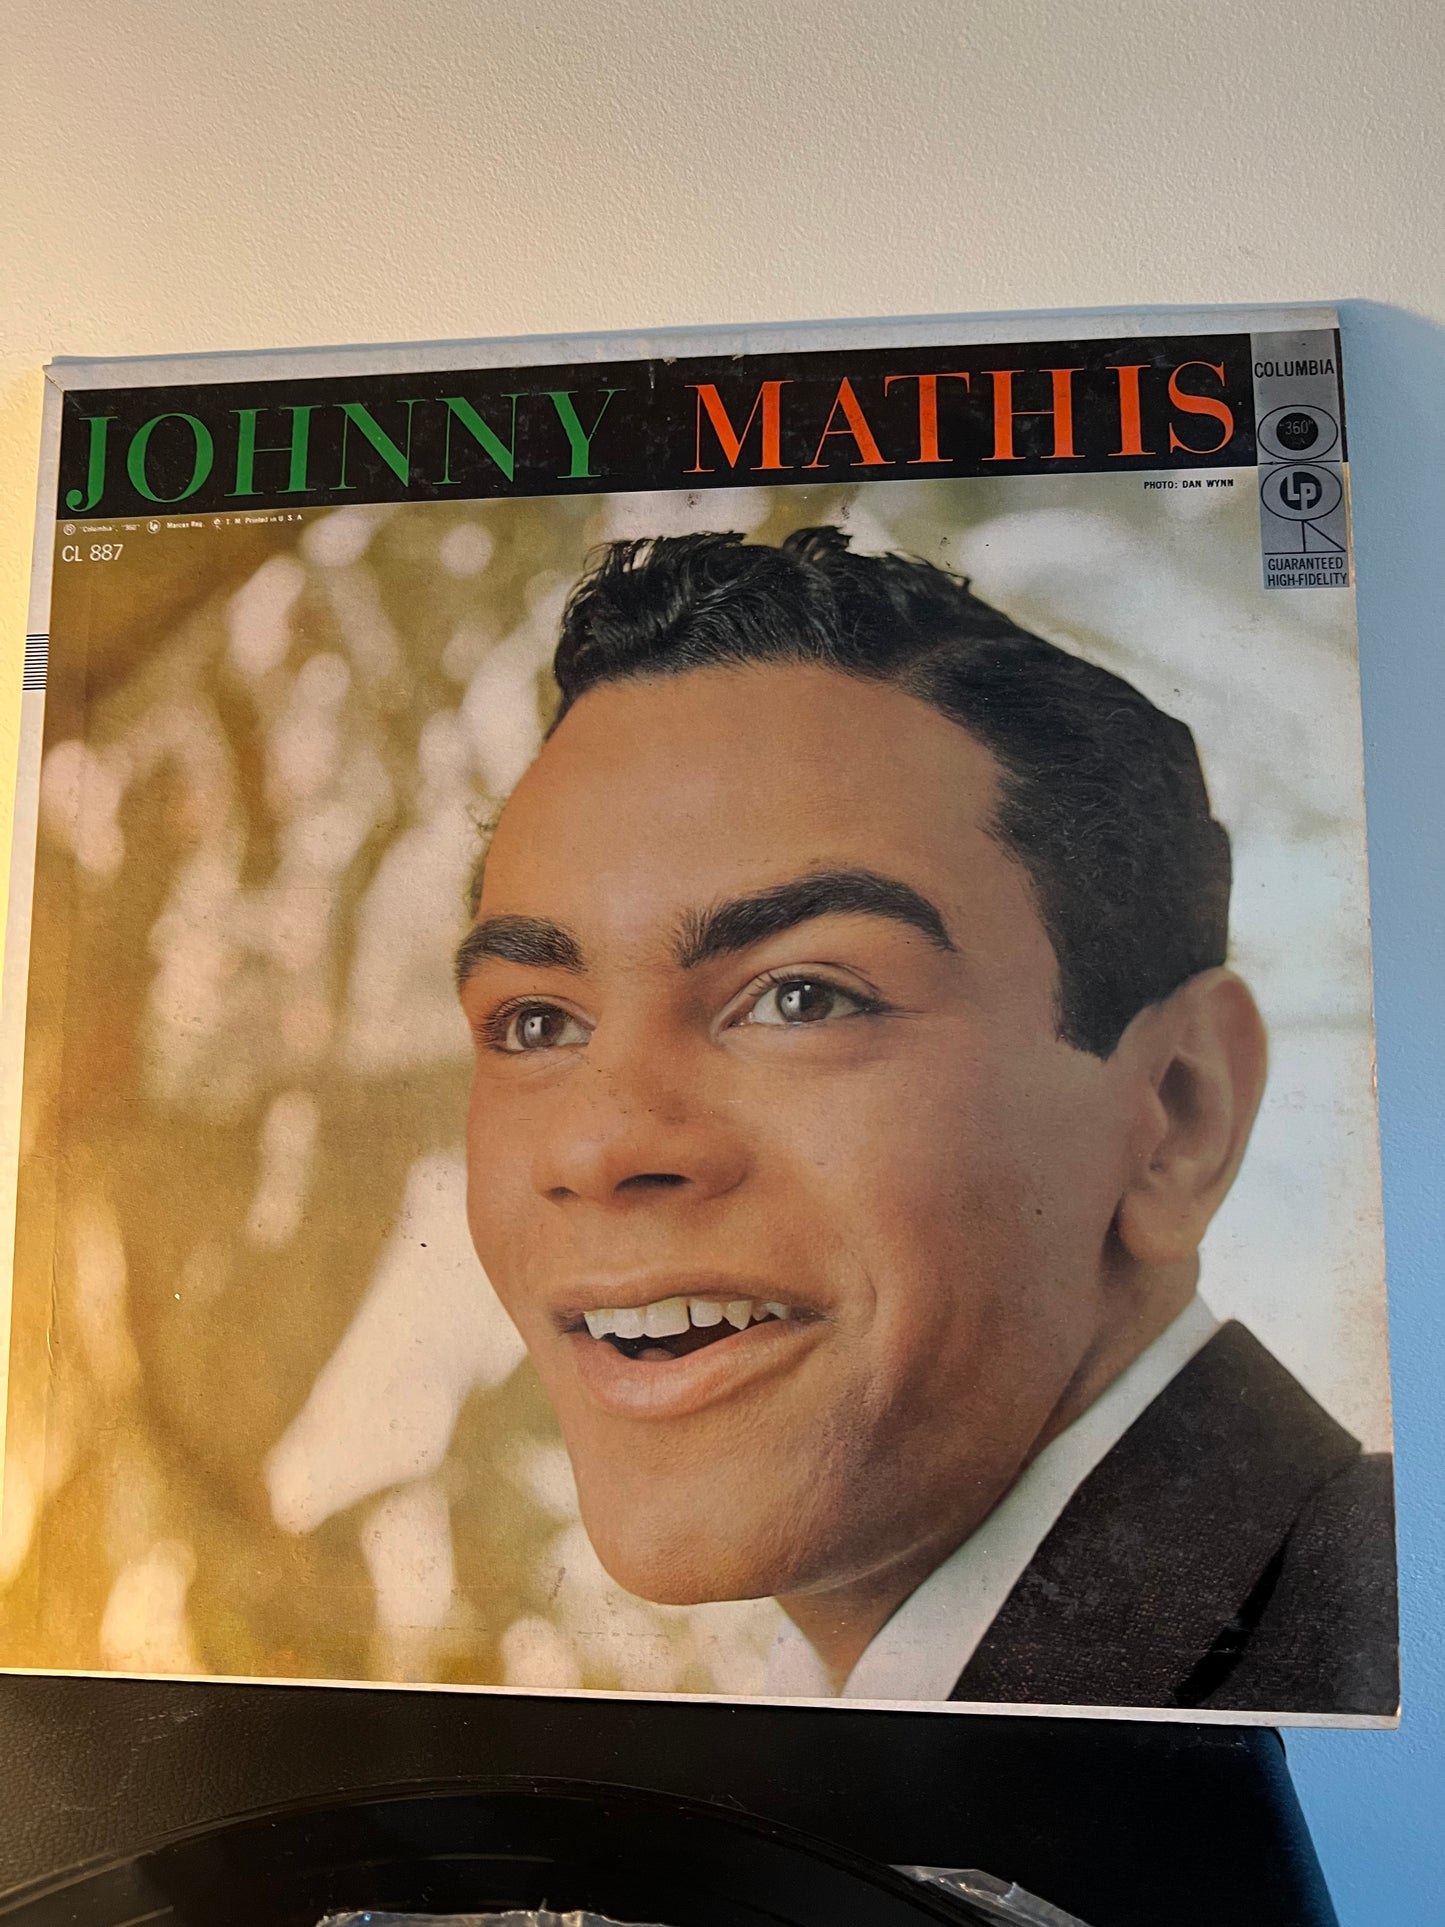 Johnny Mathis a new sound in popular song